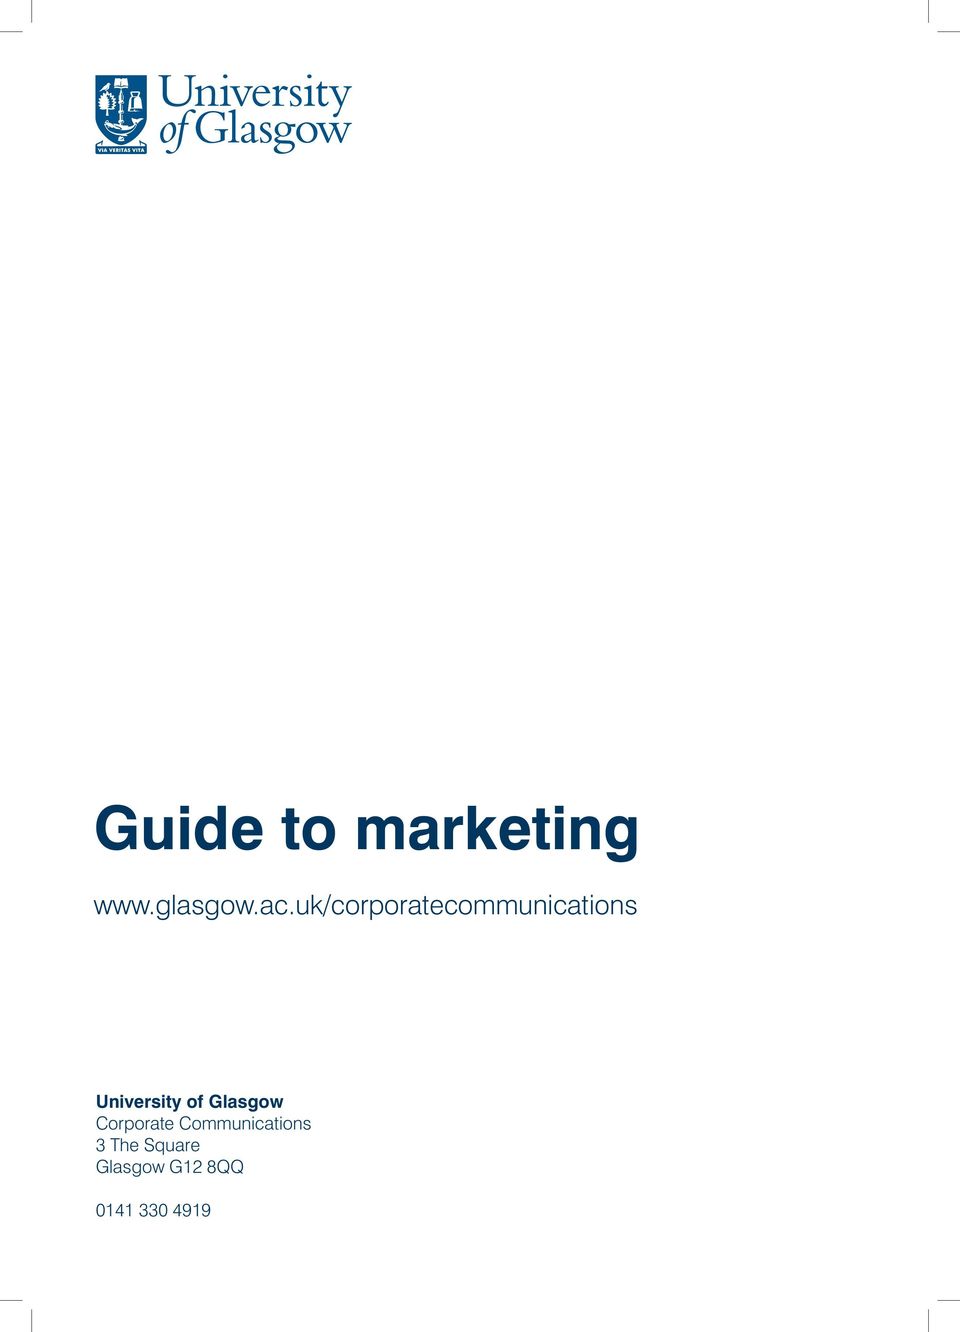 of Glasgow Corporate Communications 3